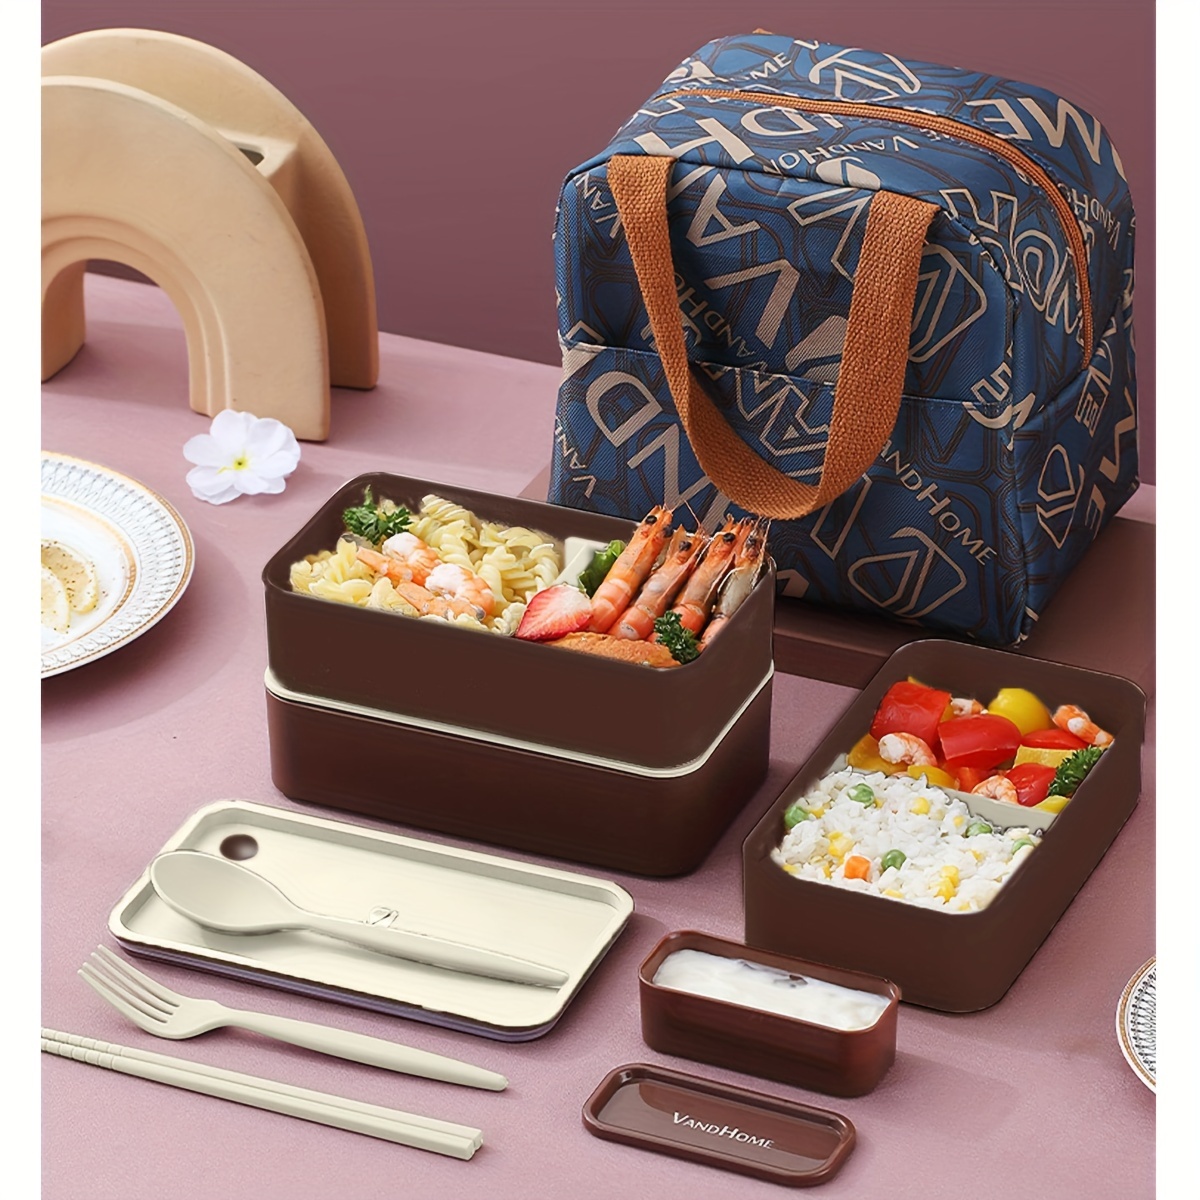 Portable Insulated Lunch Container Set Multi-layer Combination